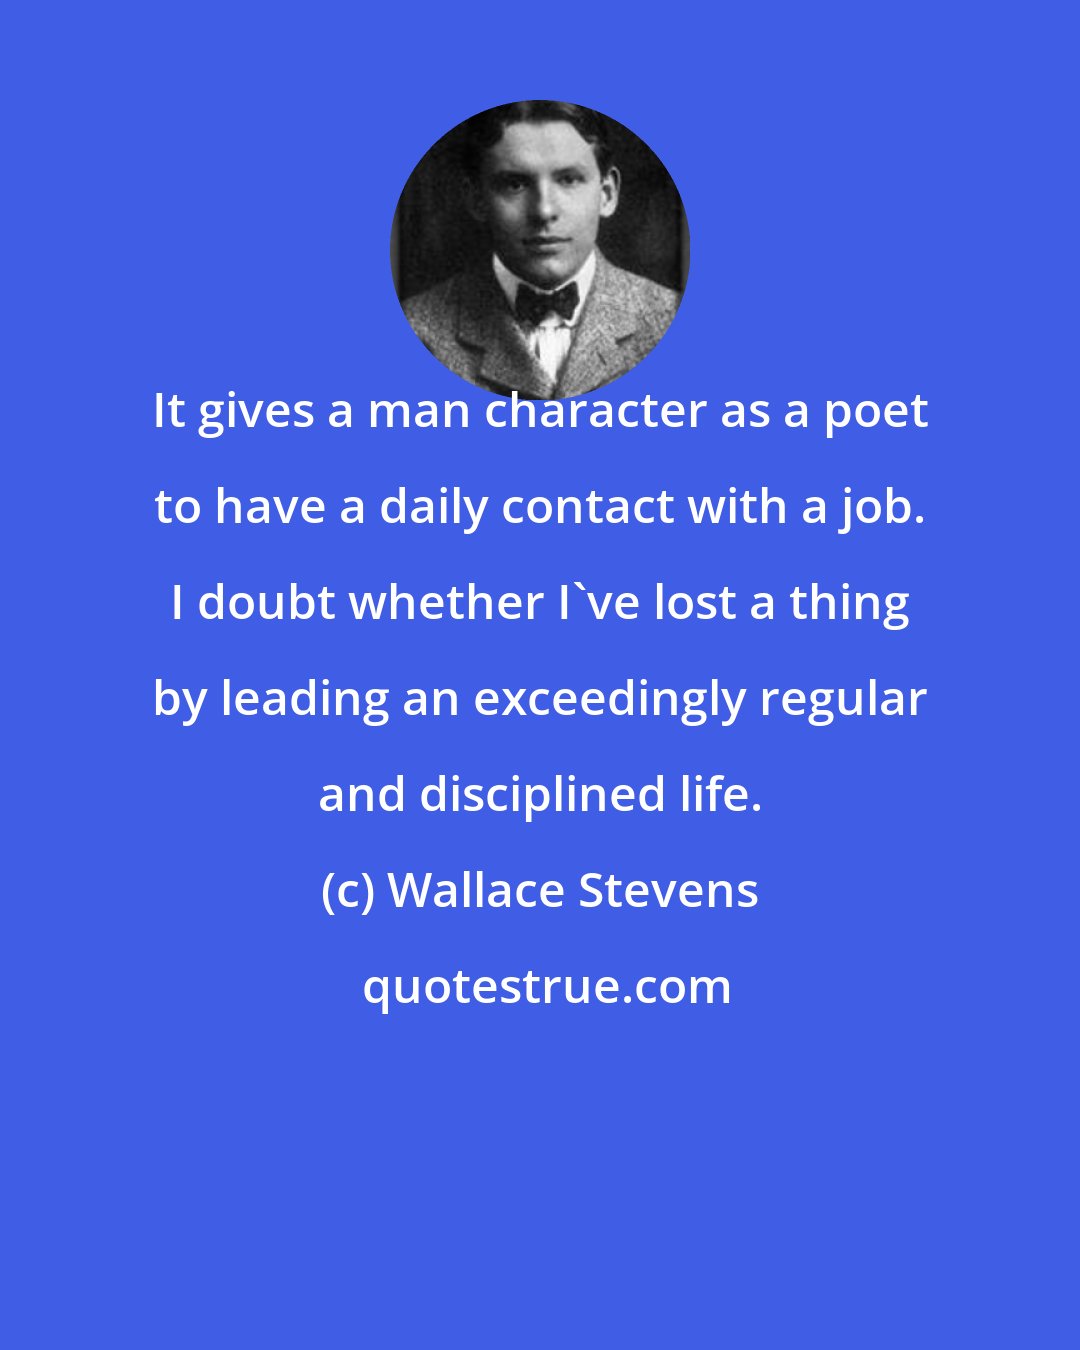 Wallace Stevens: It gives a man character as a poet to have a daily contact with a job. I doubt whether I've lost a thing by leading an exceedingly regular and disciplined life.